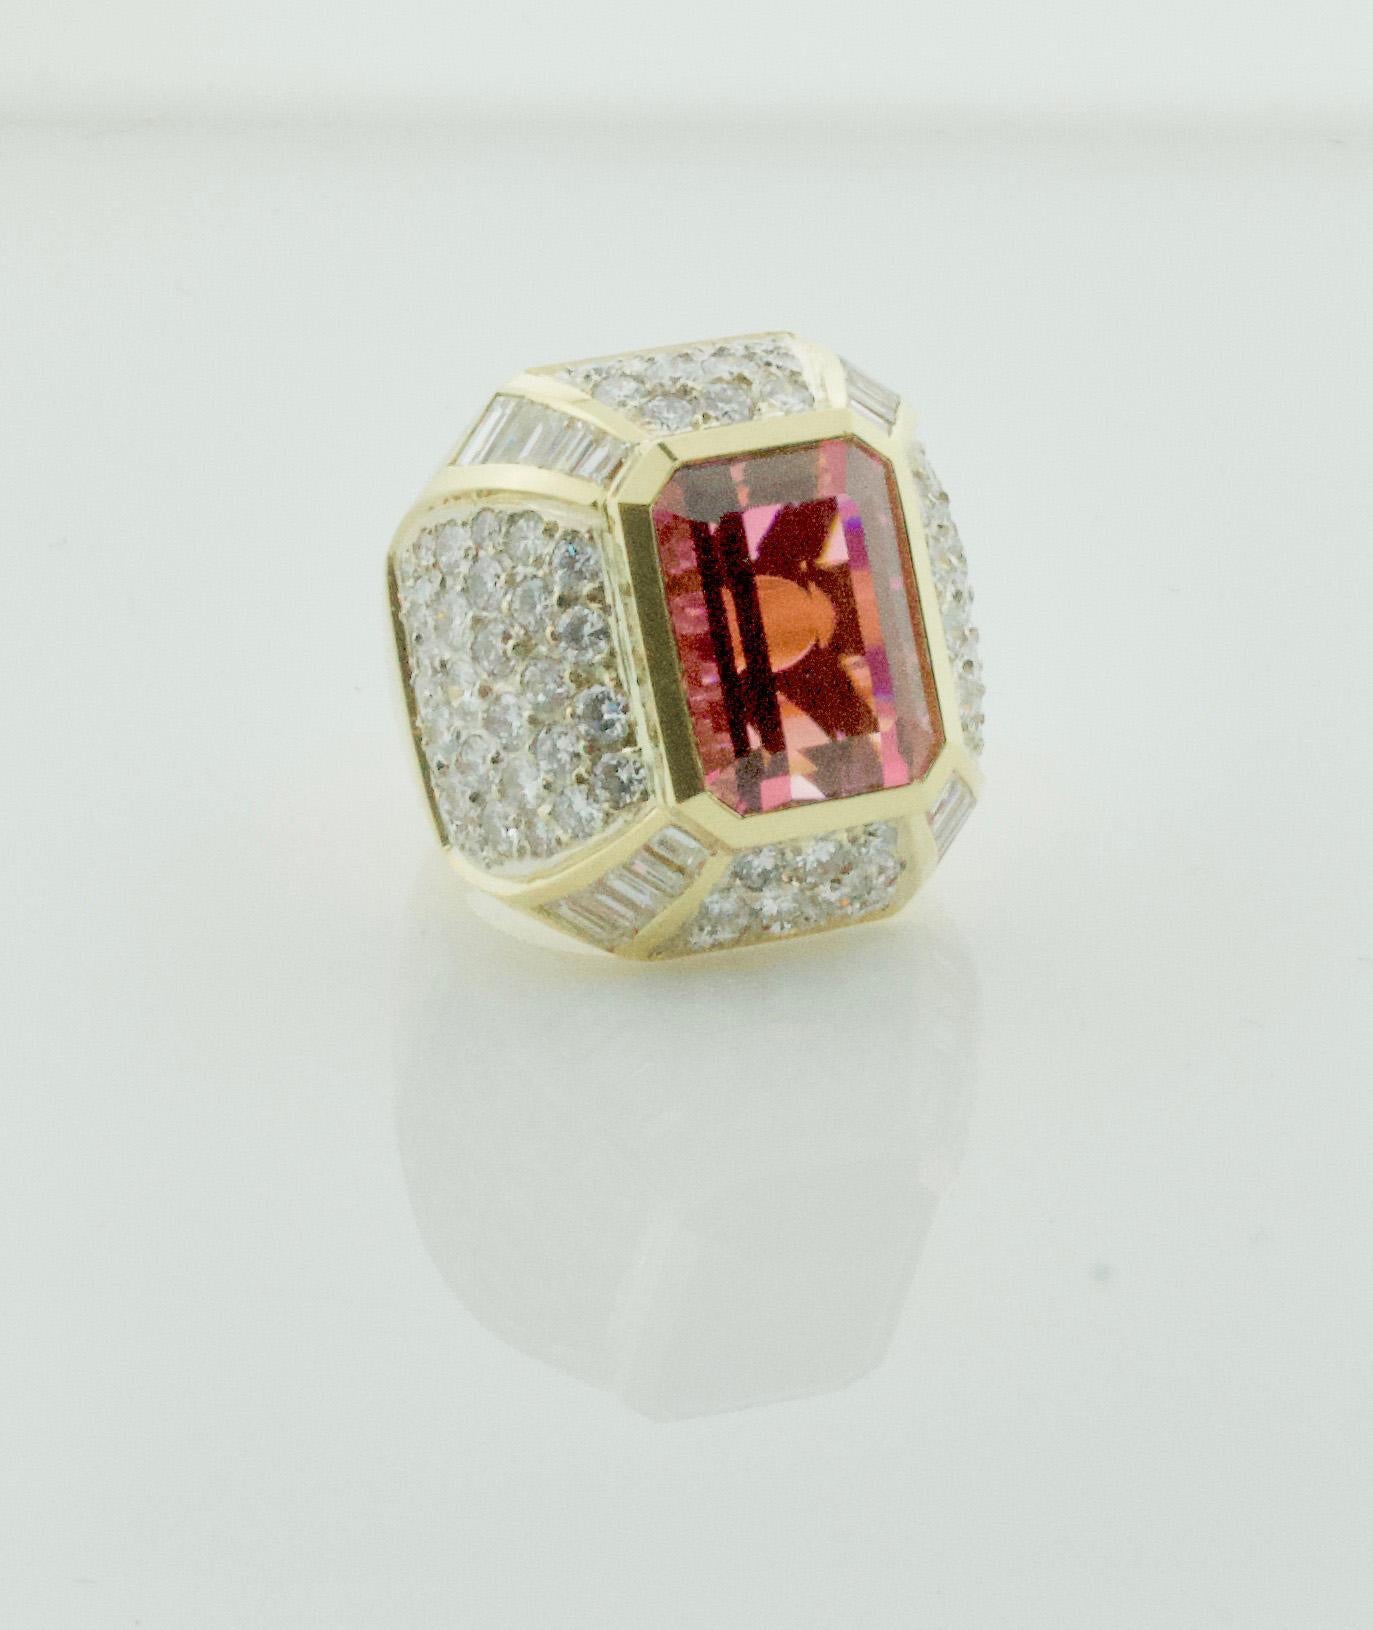 Huge Diamond and Pink Tourmaline Ring in 18k For Sale 1